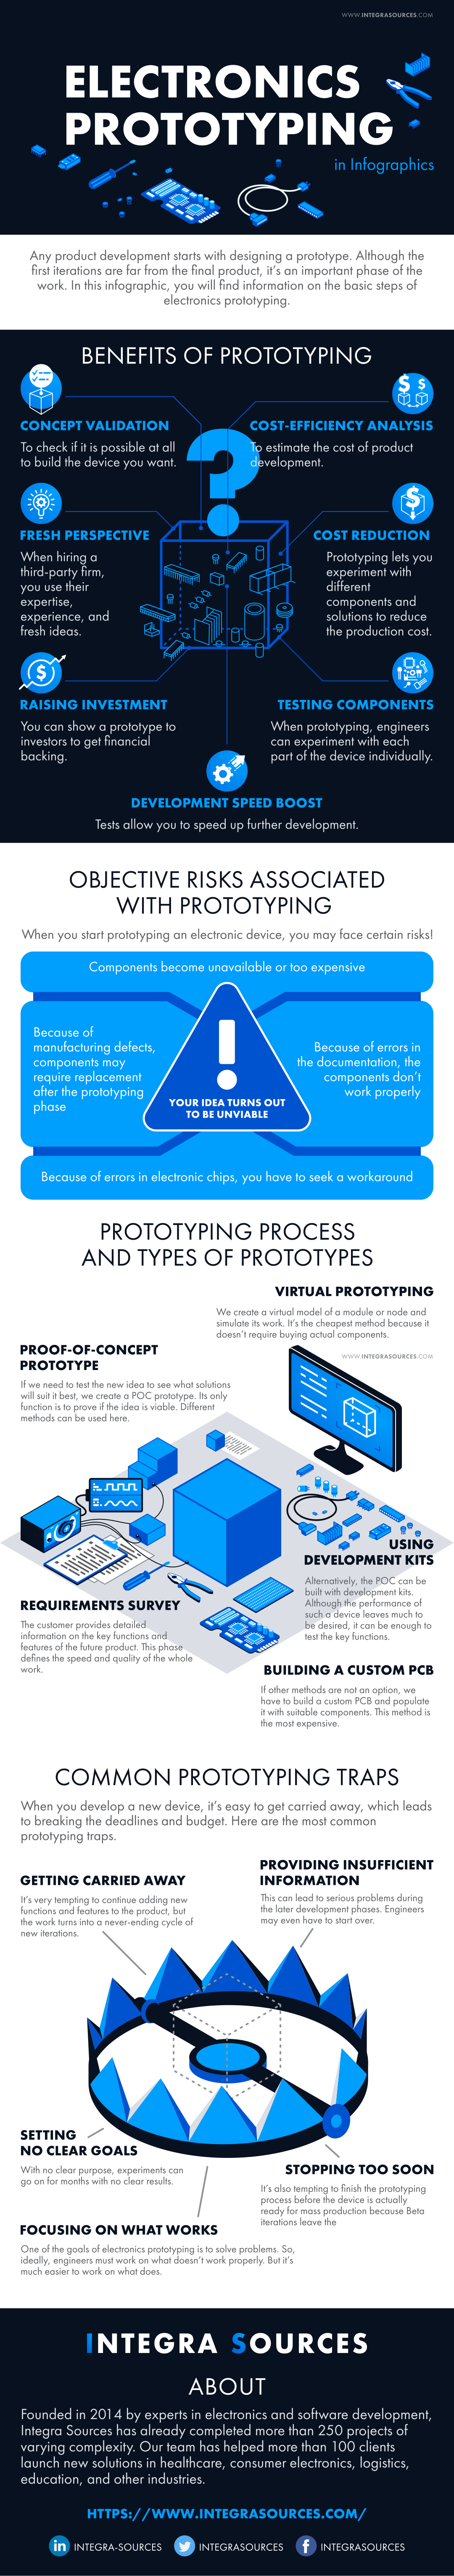 In this infographic, you will find information on the basic steps of electronics prototyping